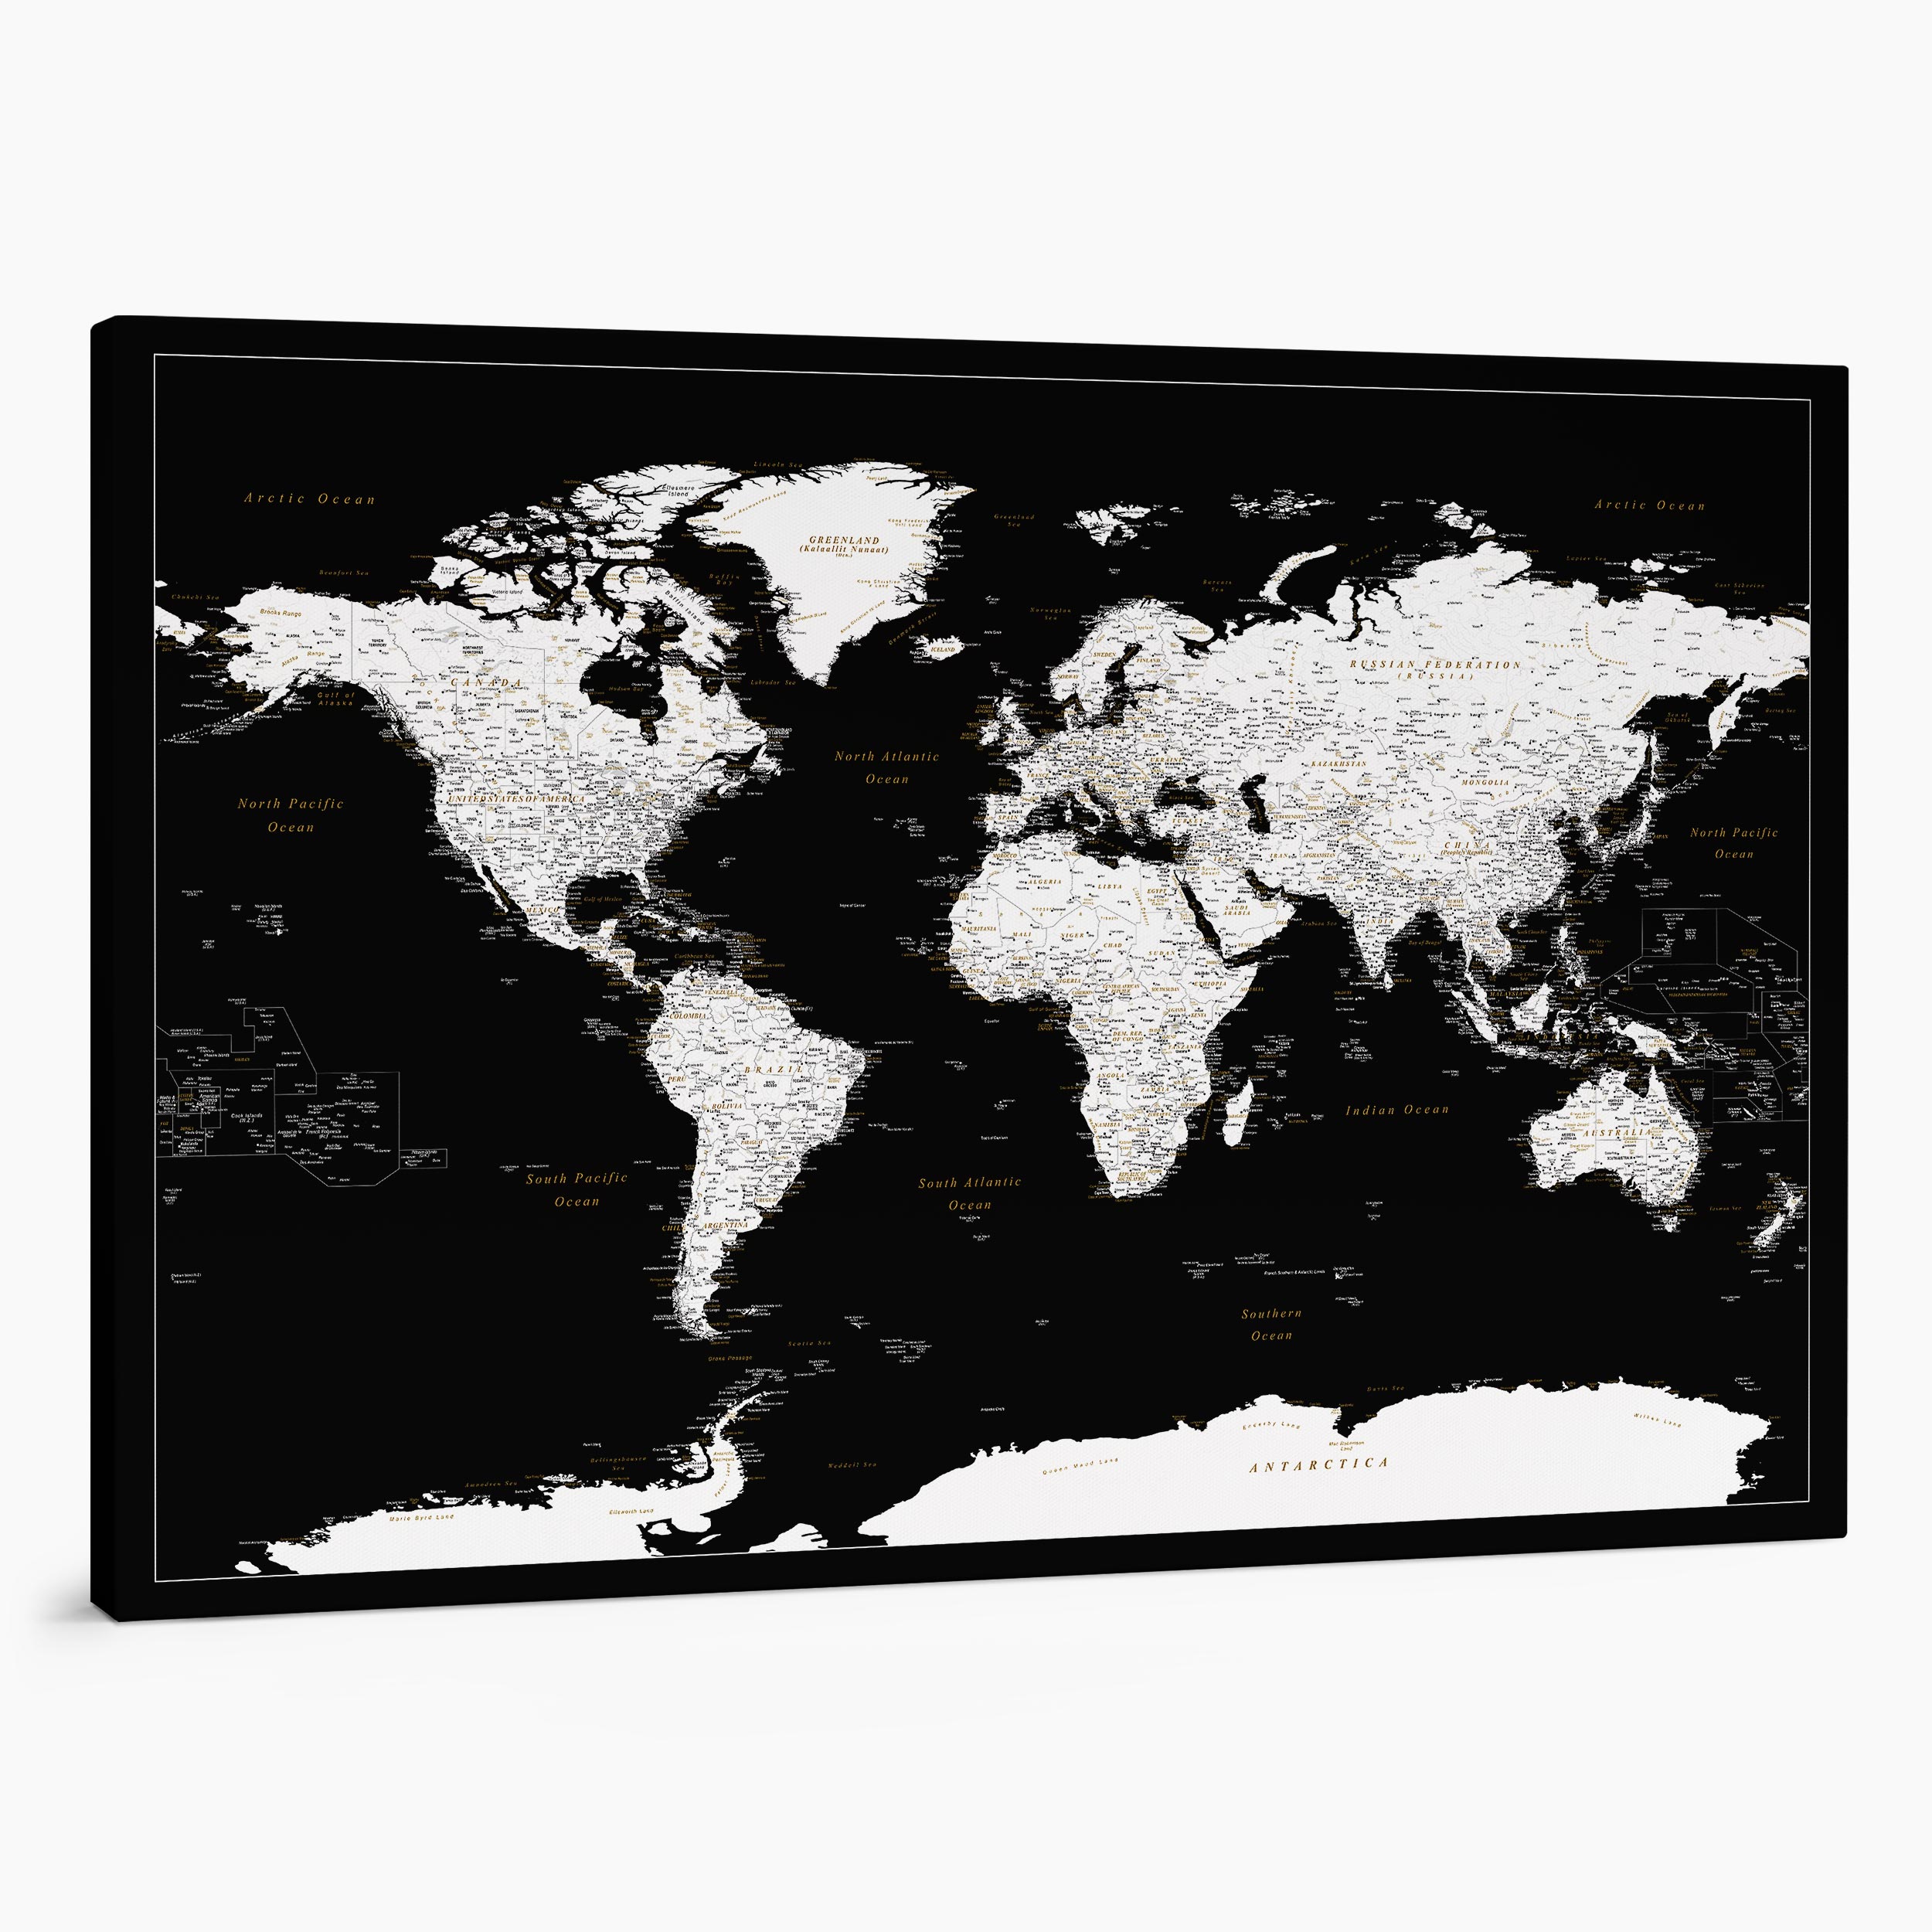 17P large push pin world map to track places visited on canvas modern black